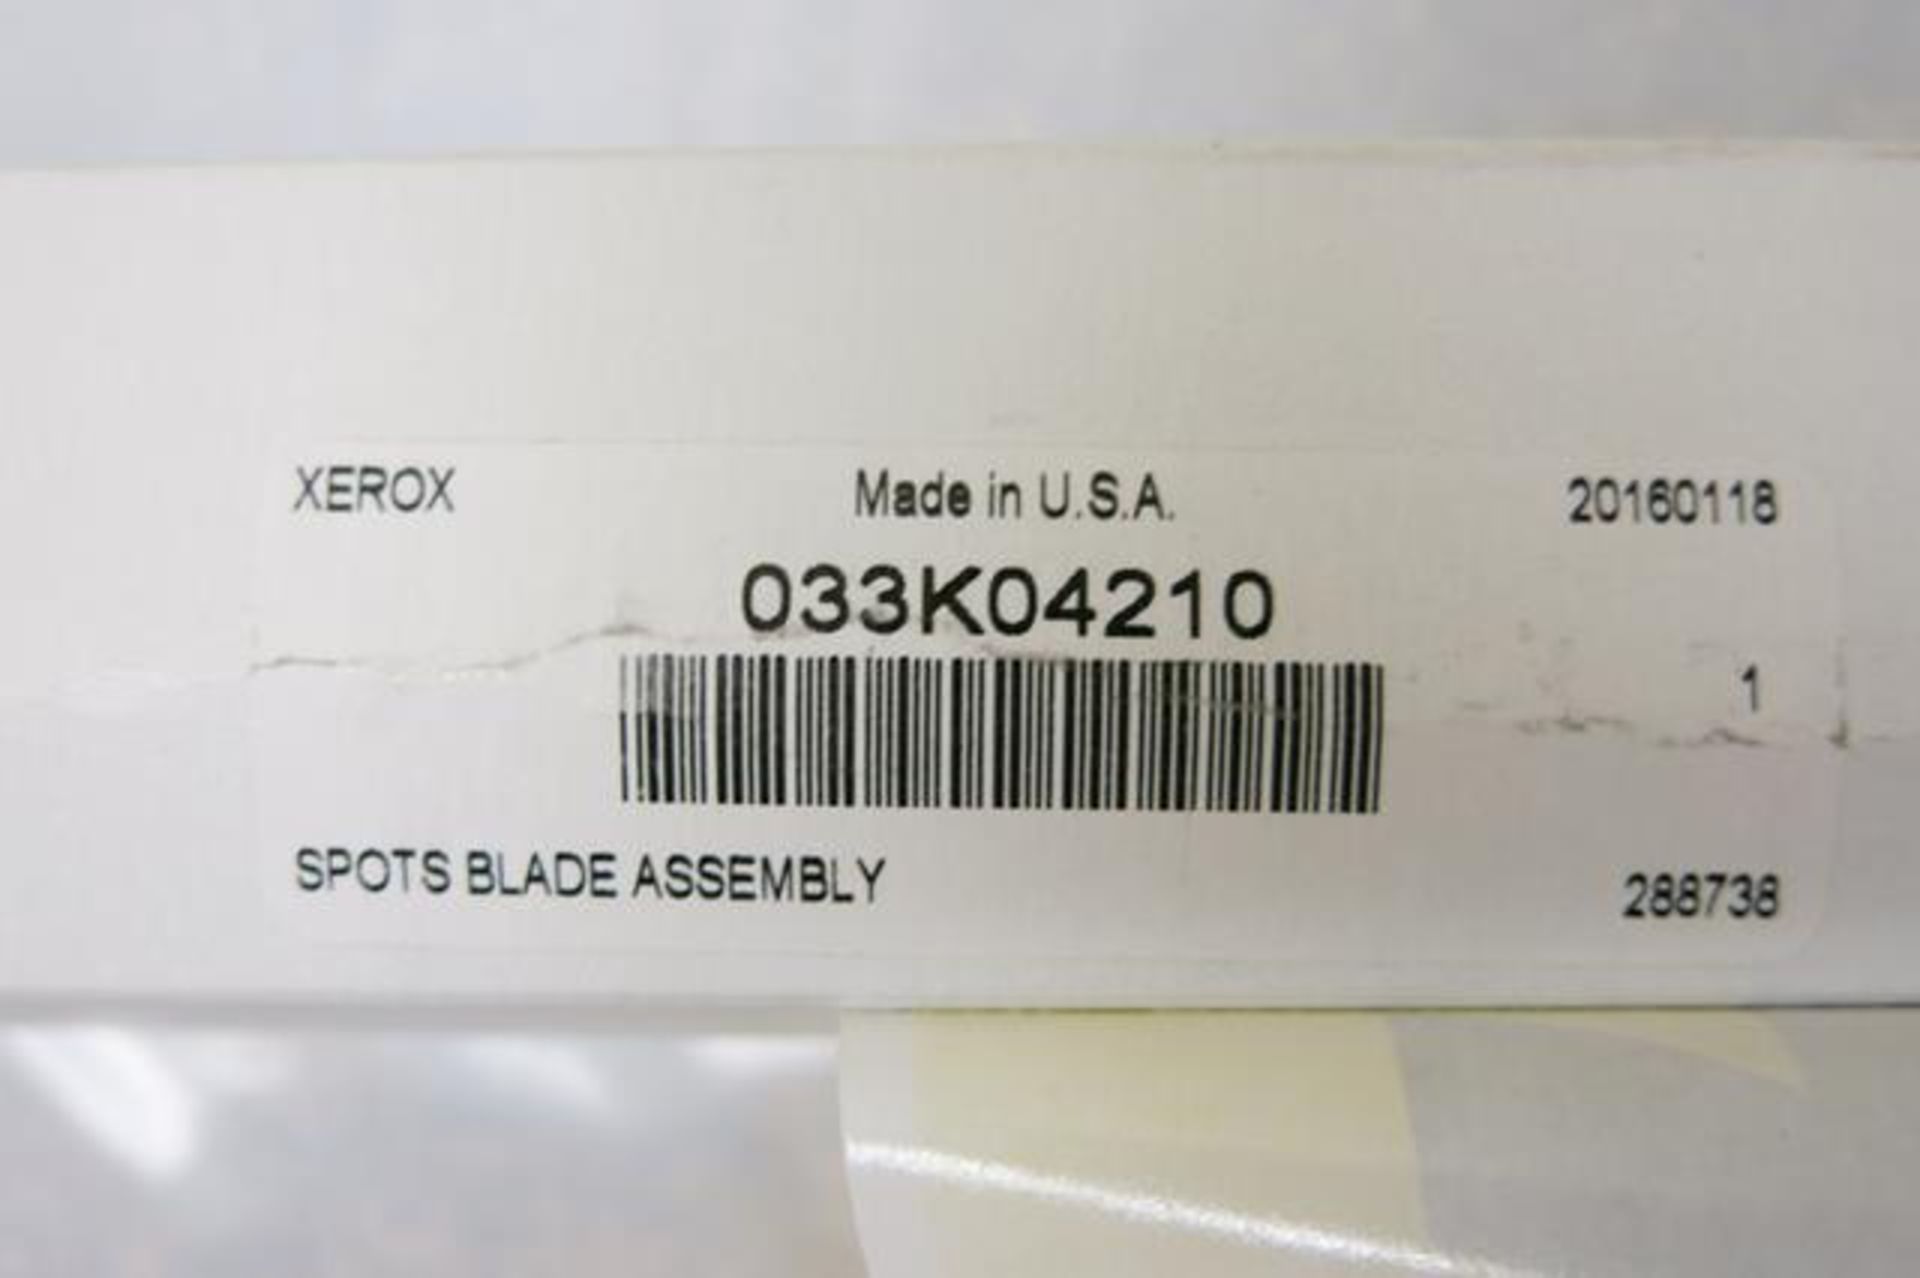 XEROX, 033K04210, SPOTS BLADE ASSEMBLY - Image 4 of 4